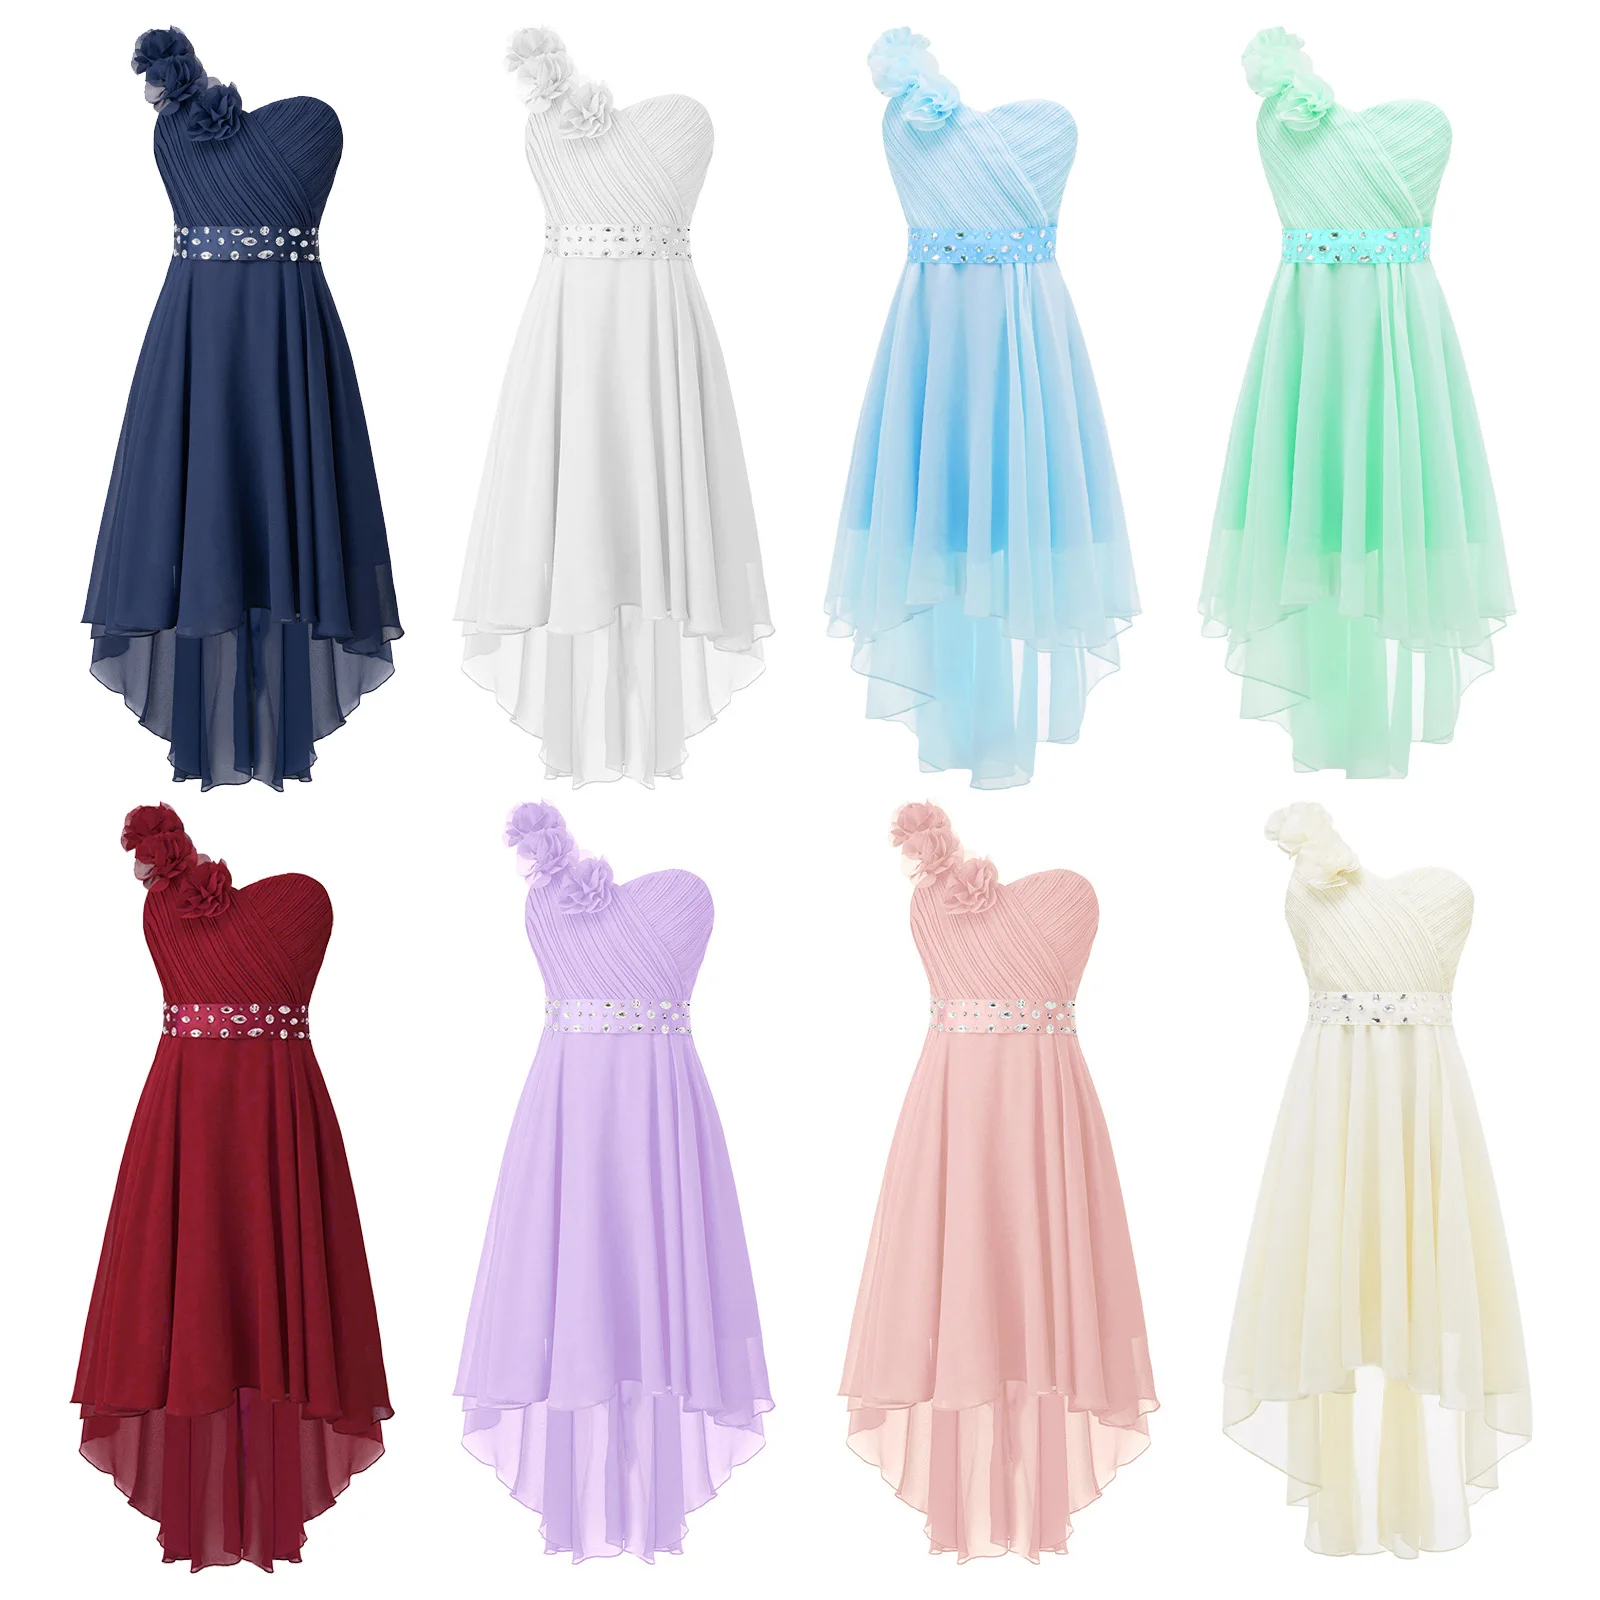 Kid Girls Child Flower Chiffon Tulle Lace Dress Wedding Bridesmaid One-shoulder Formal Party Summer Maxi Dance Prom Gown Dress